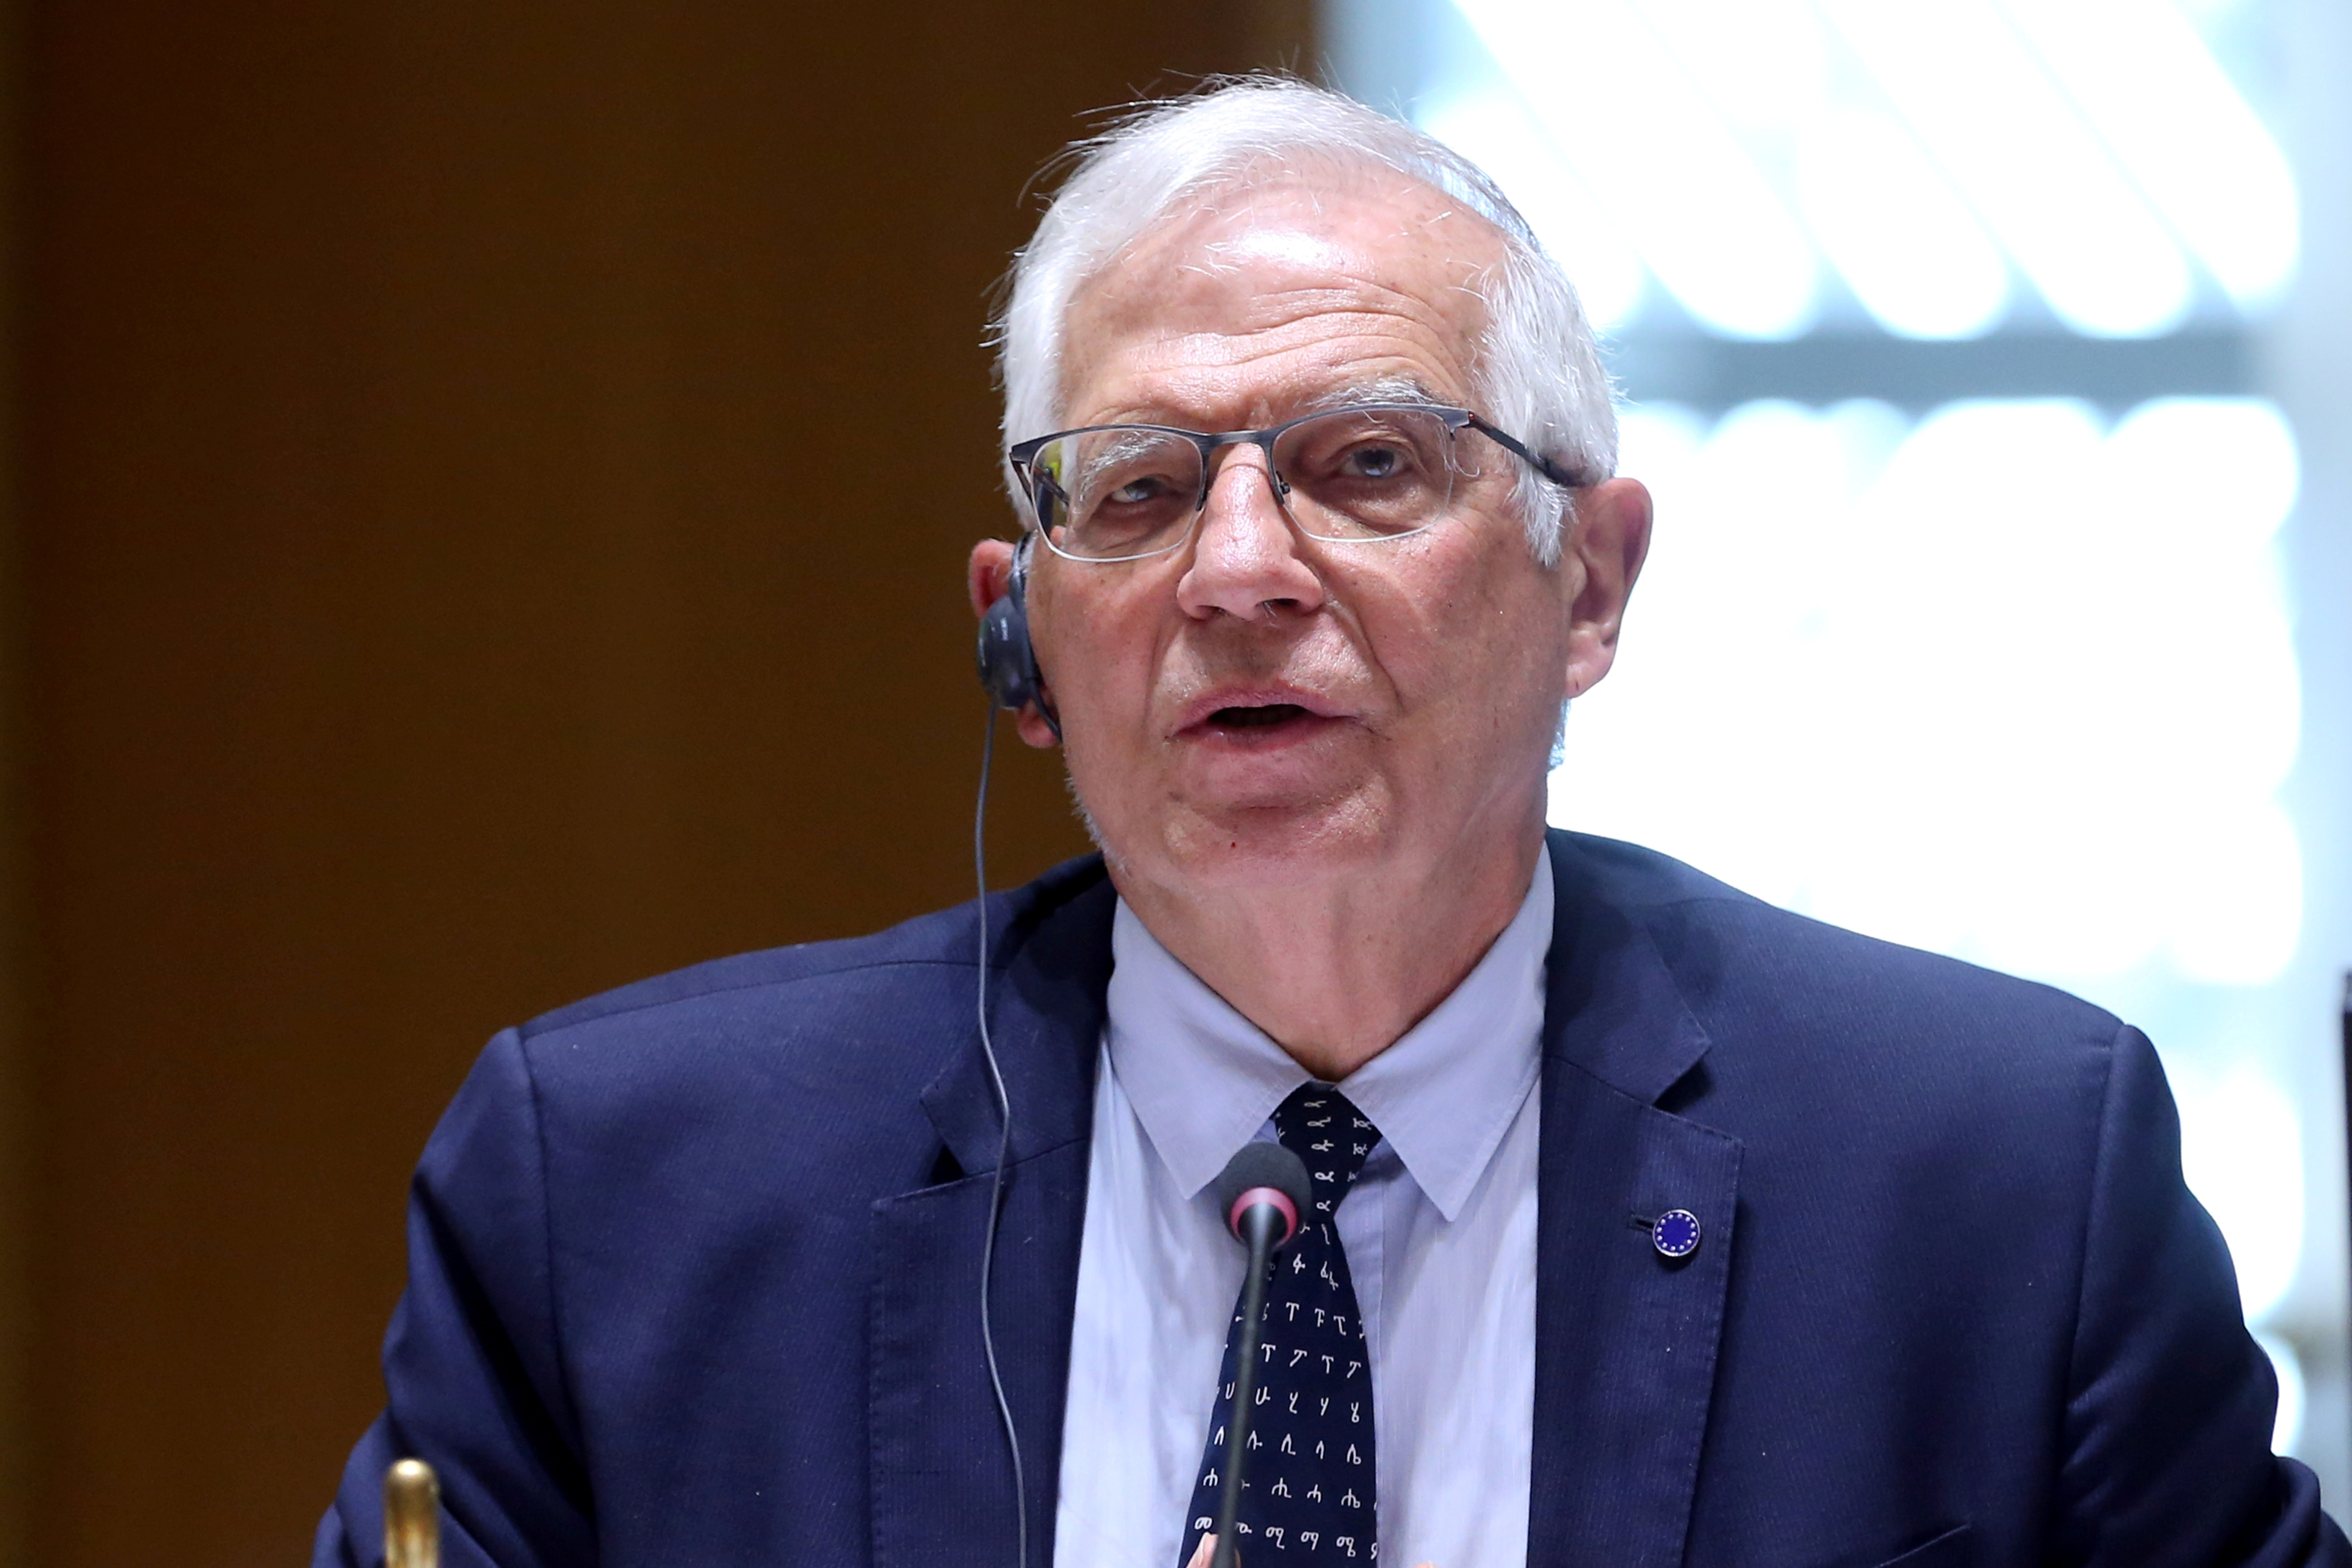 European High Representative of the Union for Foreign Affairs Josep Borrell speaks during a meeting via video conference with EU foreign ministers at the European Council in Brussels, Belgium April 19, 2021. Francois Walschaerts/Pool via REUTERS